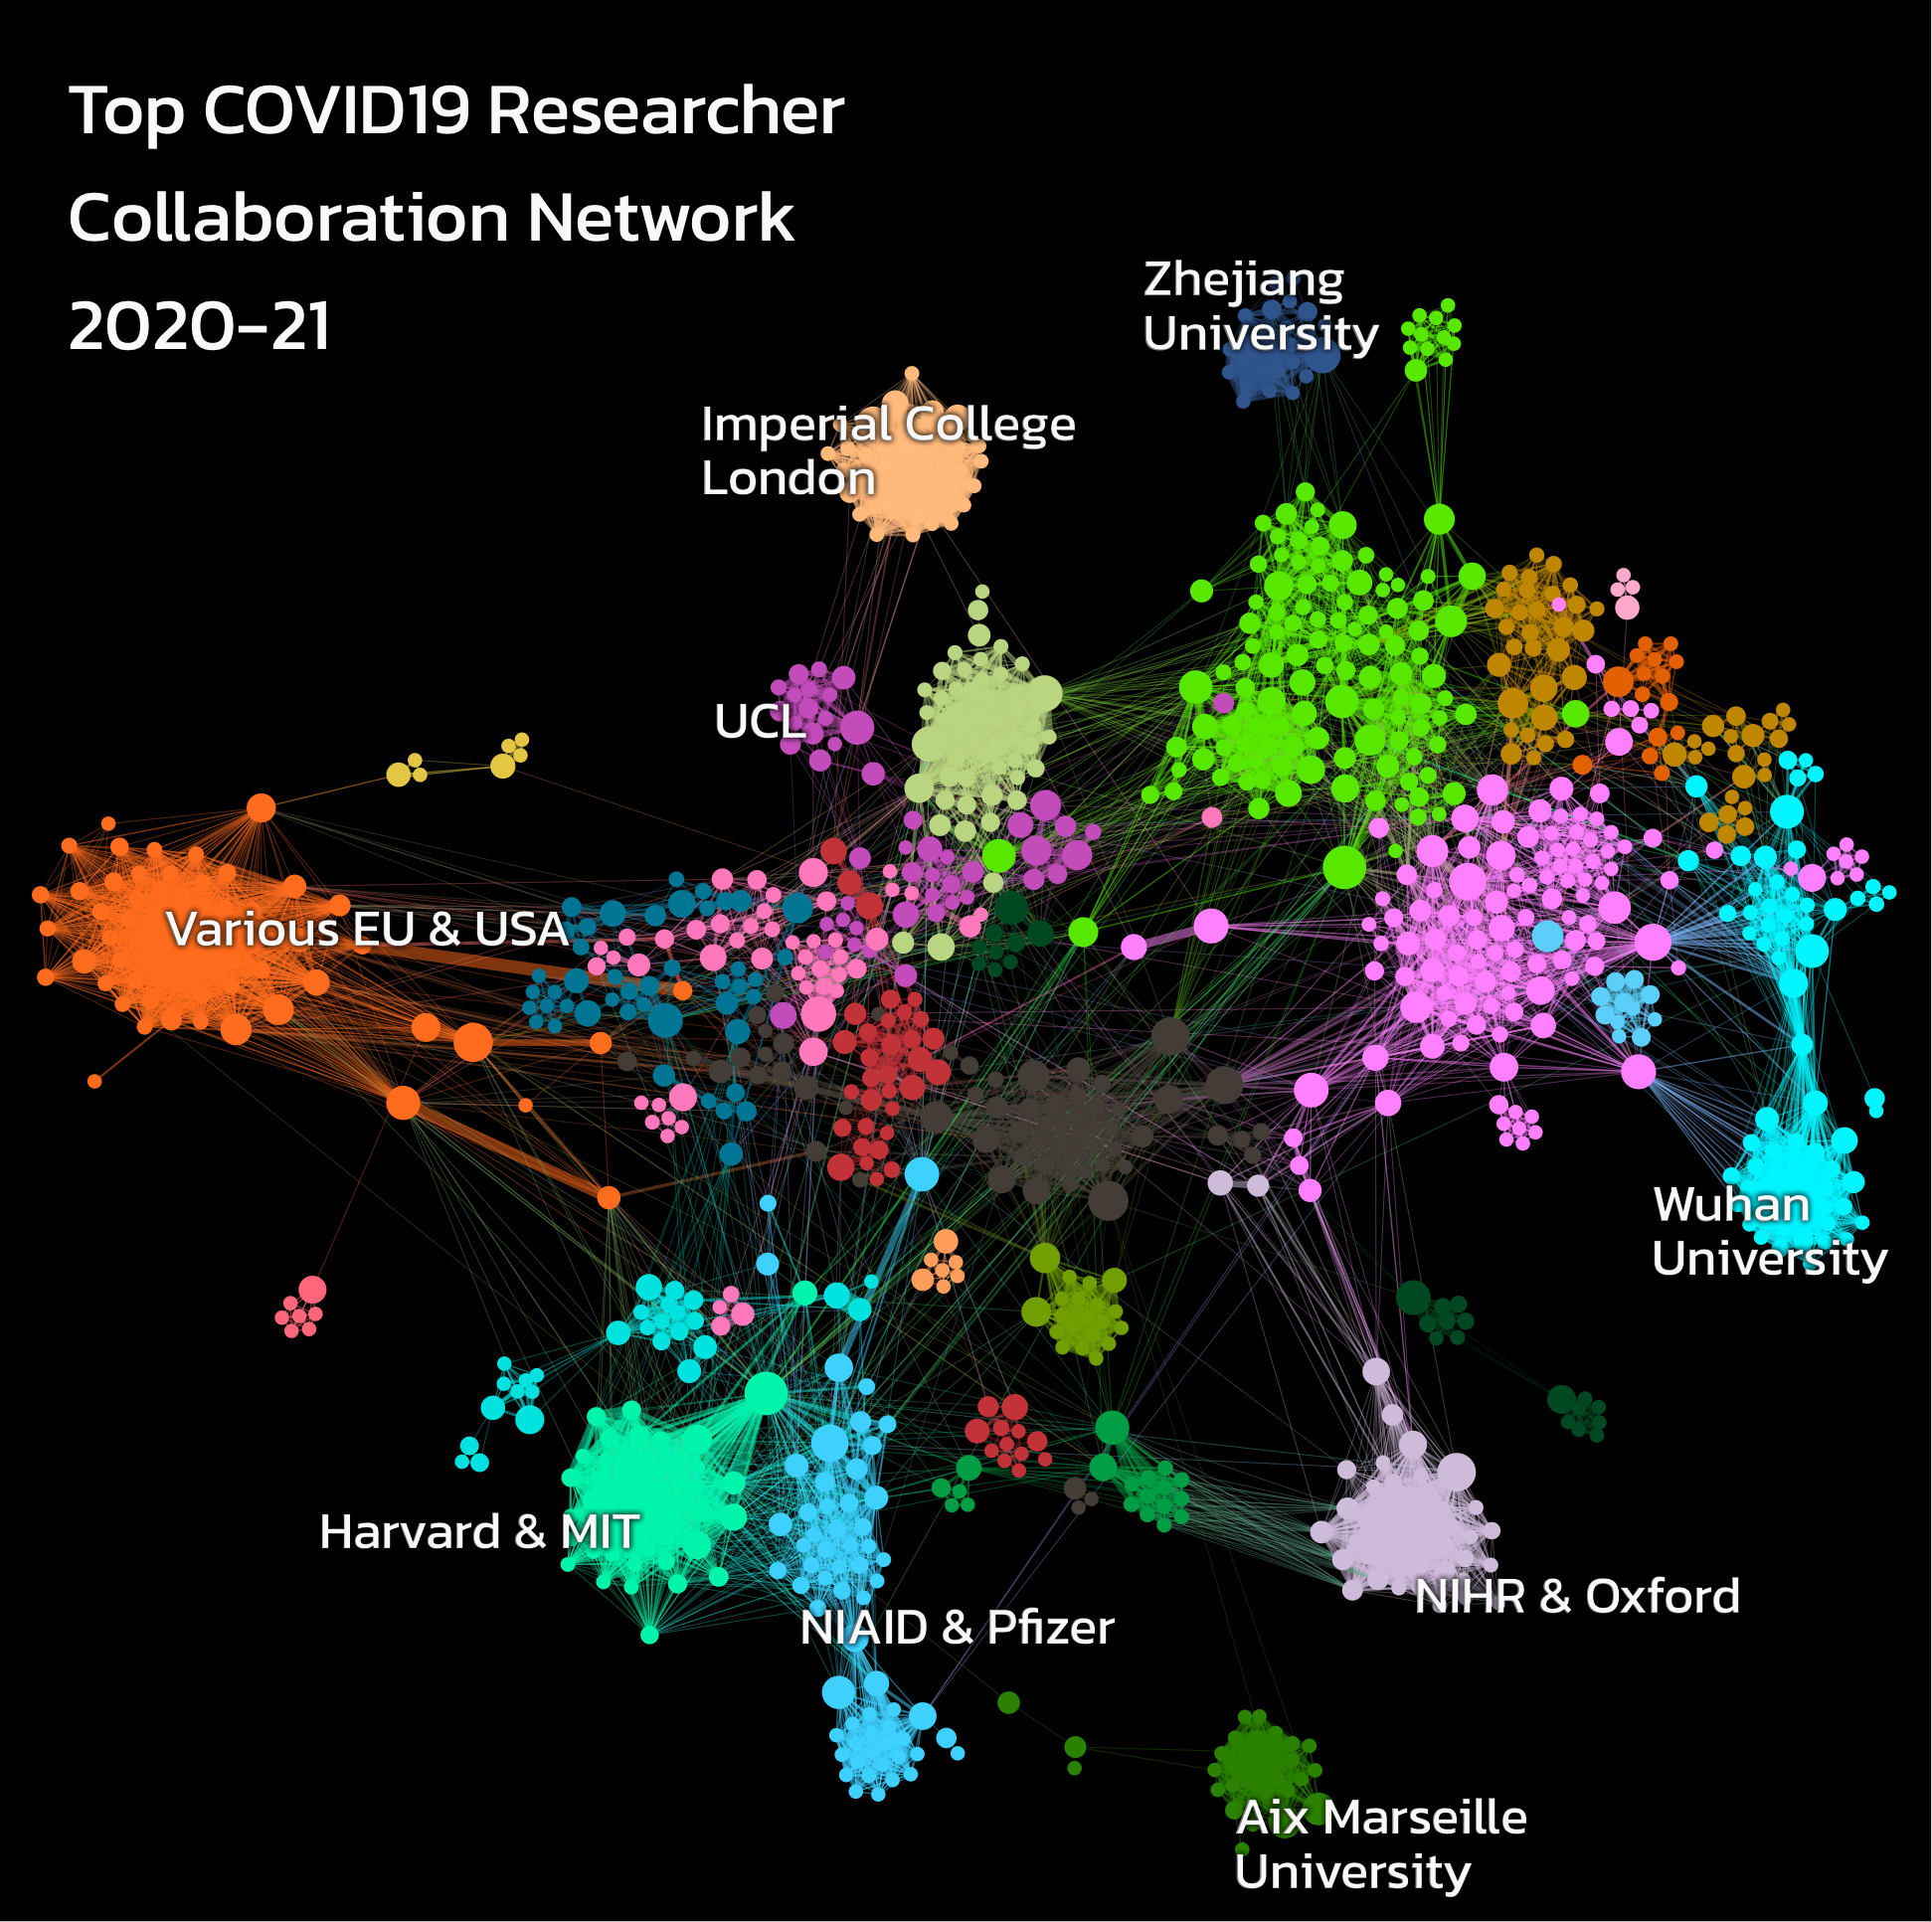 A network diagram showing top COVID19 researchers and their collaboration network